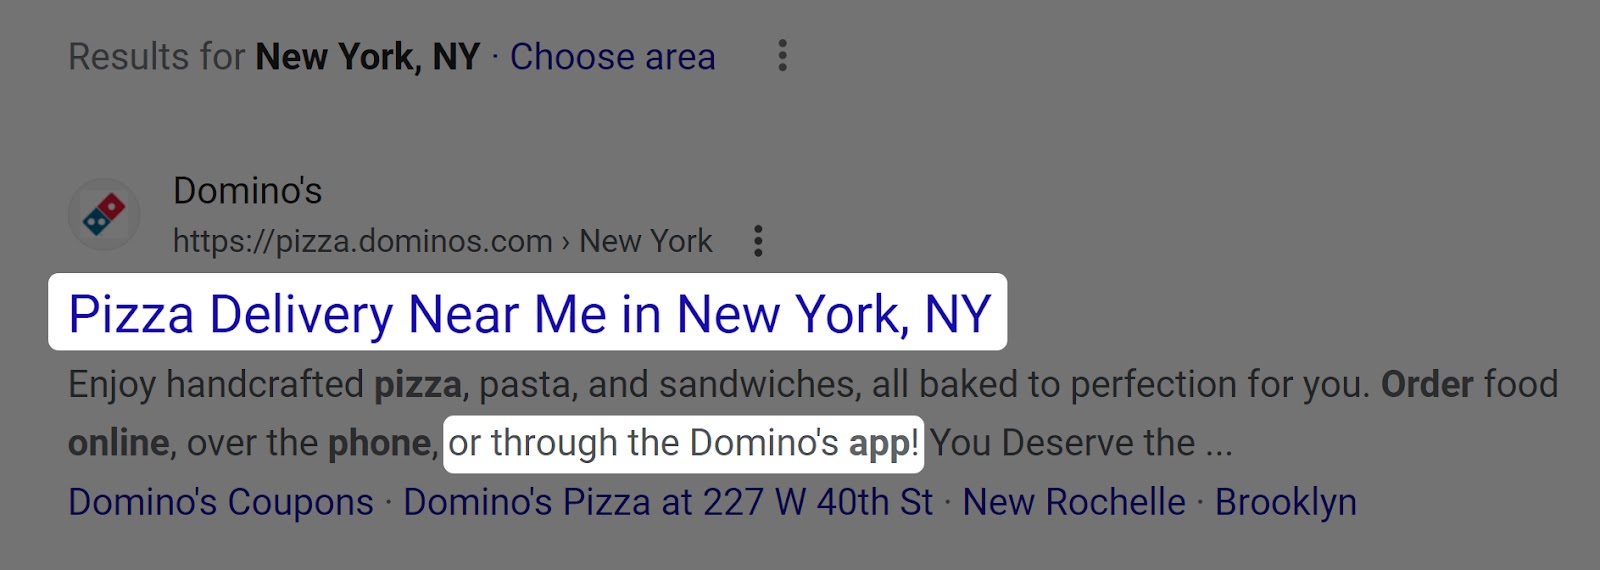 How Domino’s Pizza mobile app on Google search